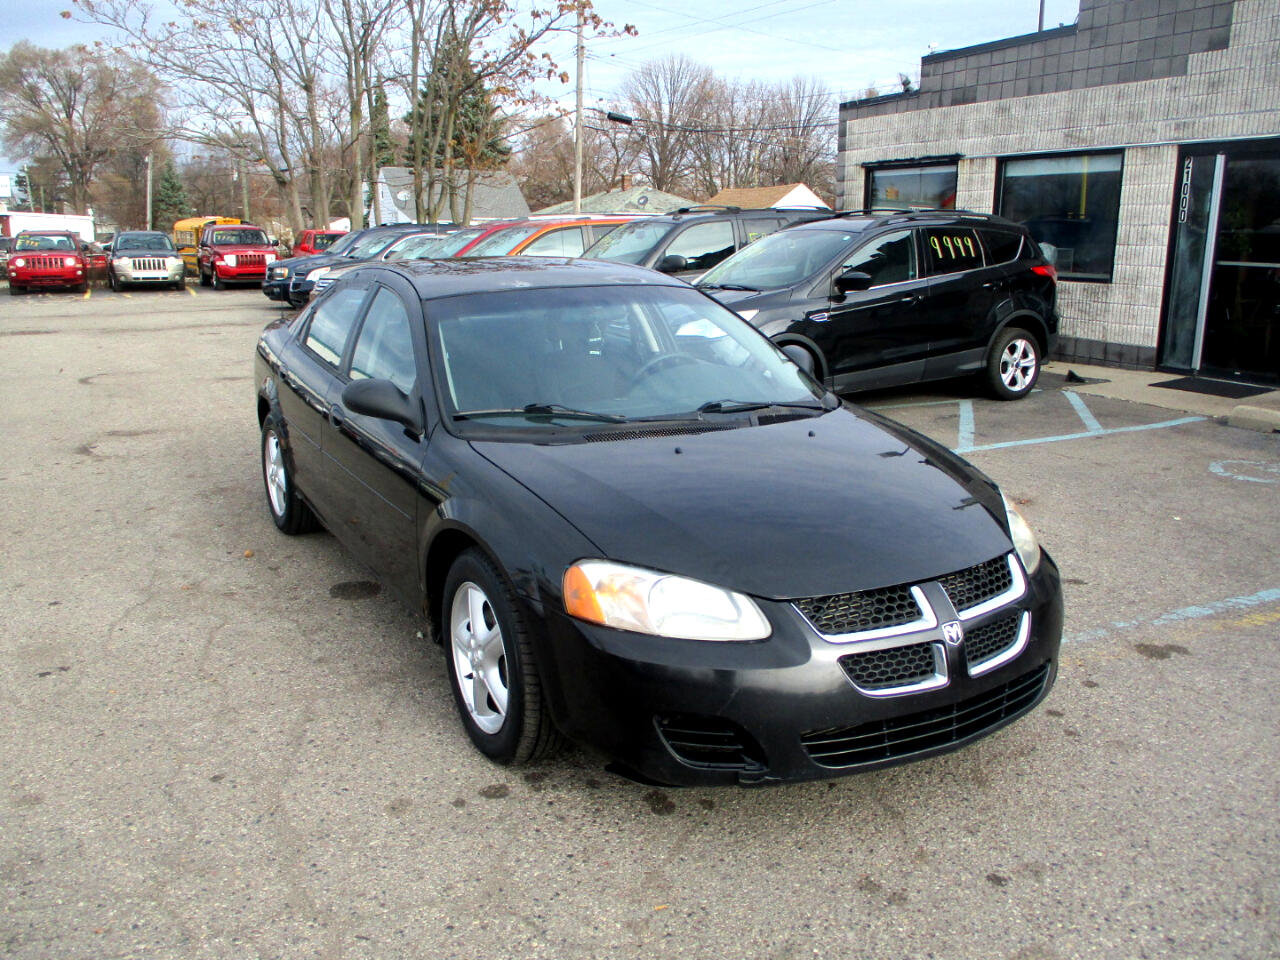 Used 2005 Dodge Stratus for Sale Right Now - Autotrader